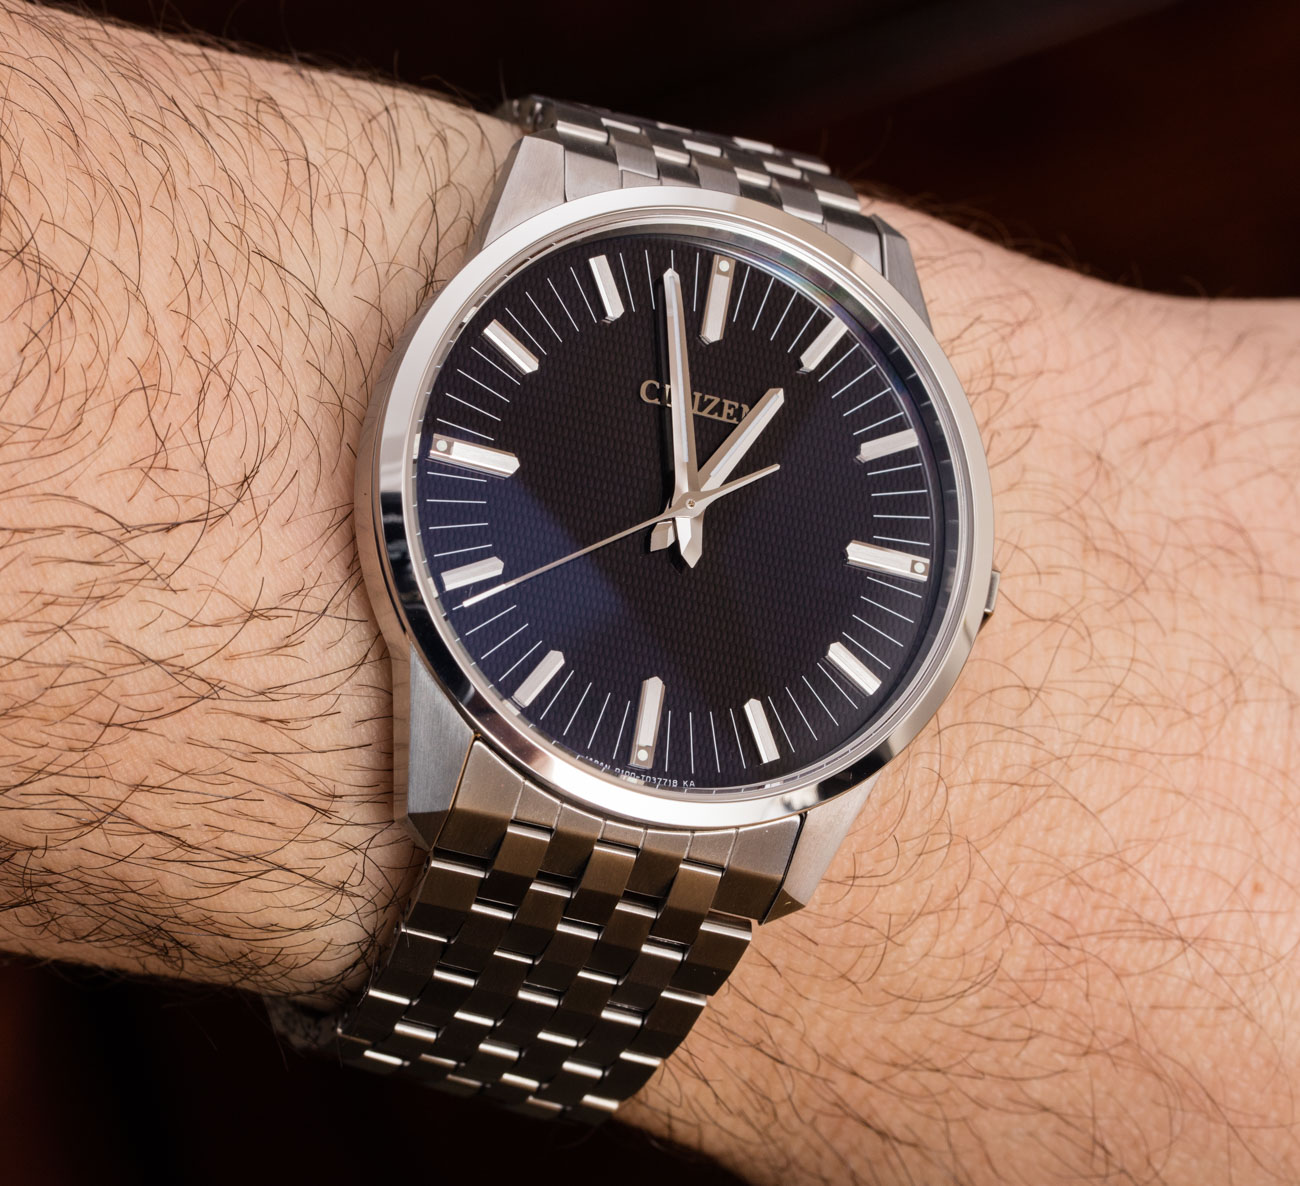 Citizen Caliber 0100 World's Most Accurate Watch Review | aBlogtoWatch